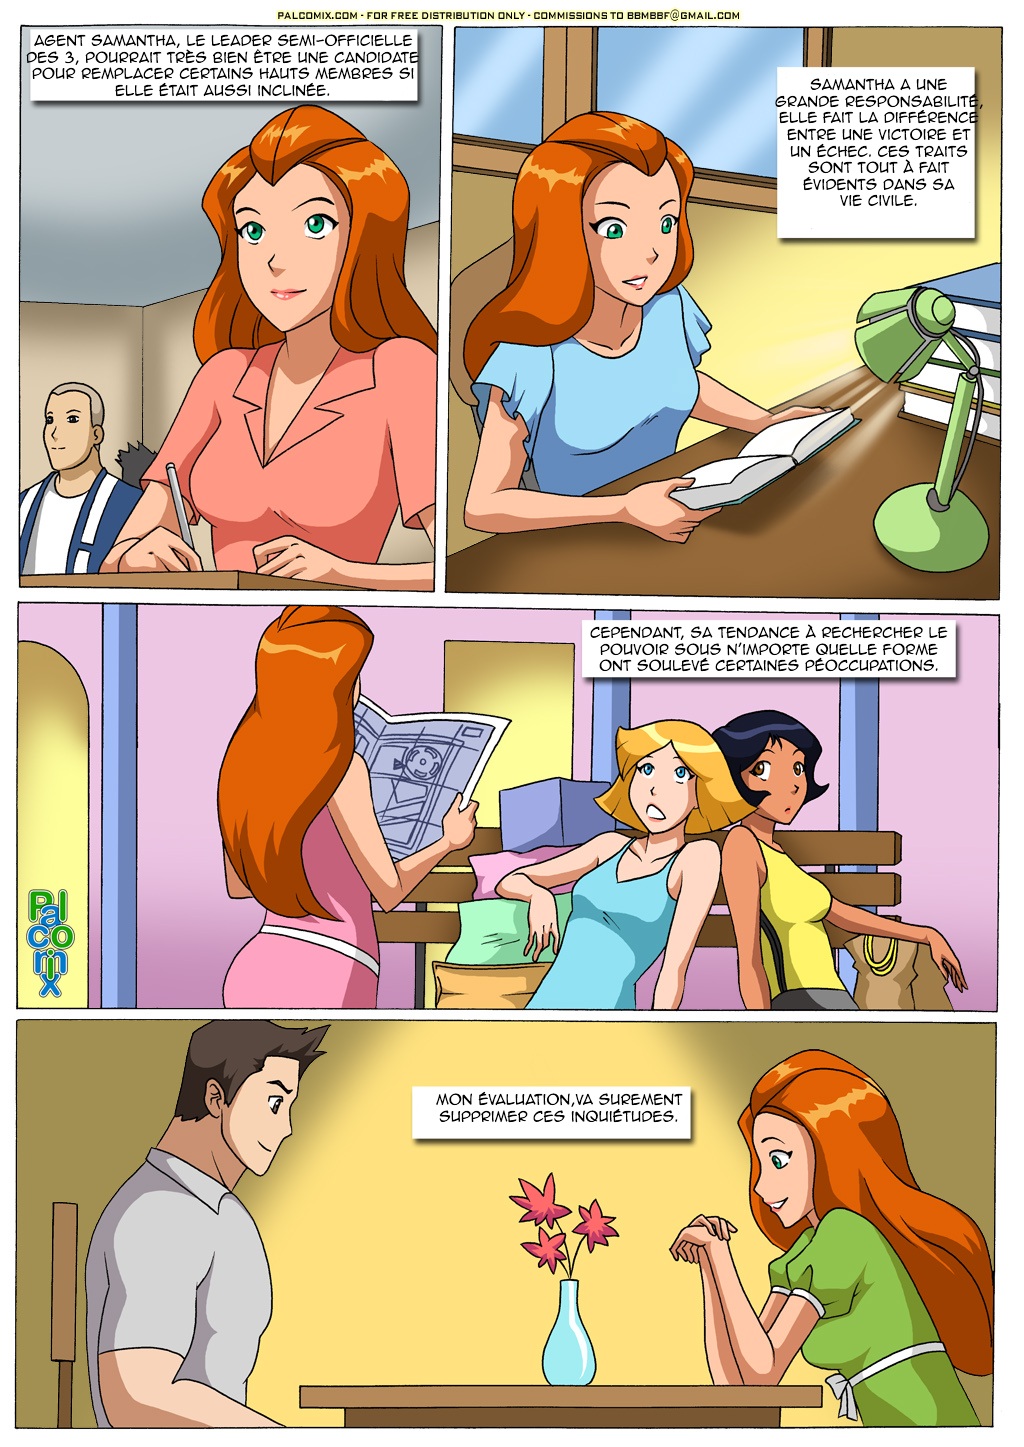 [Palcomix] Deep Cover Evaluation (Totally Spies) [French] 